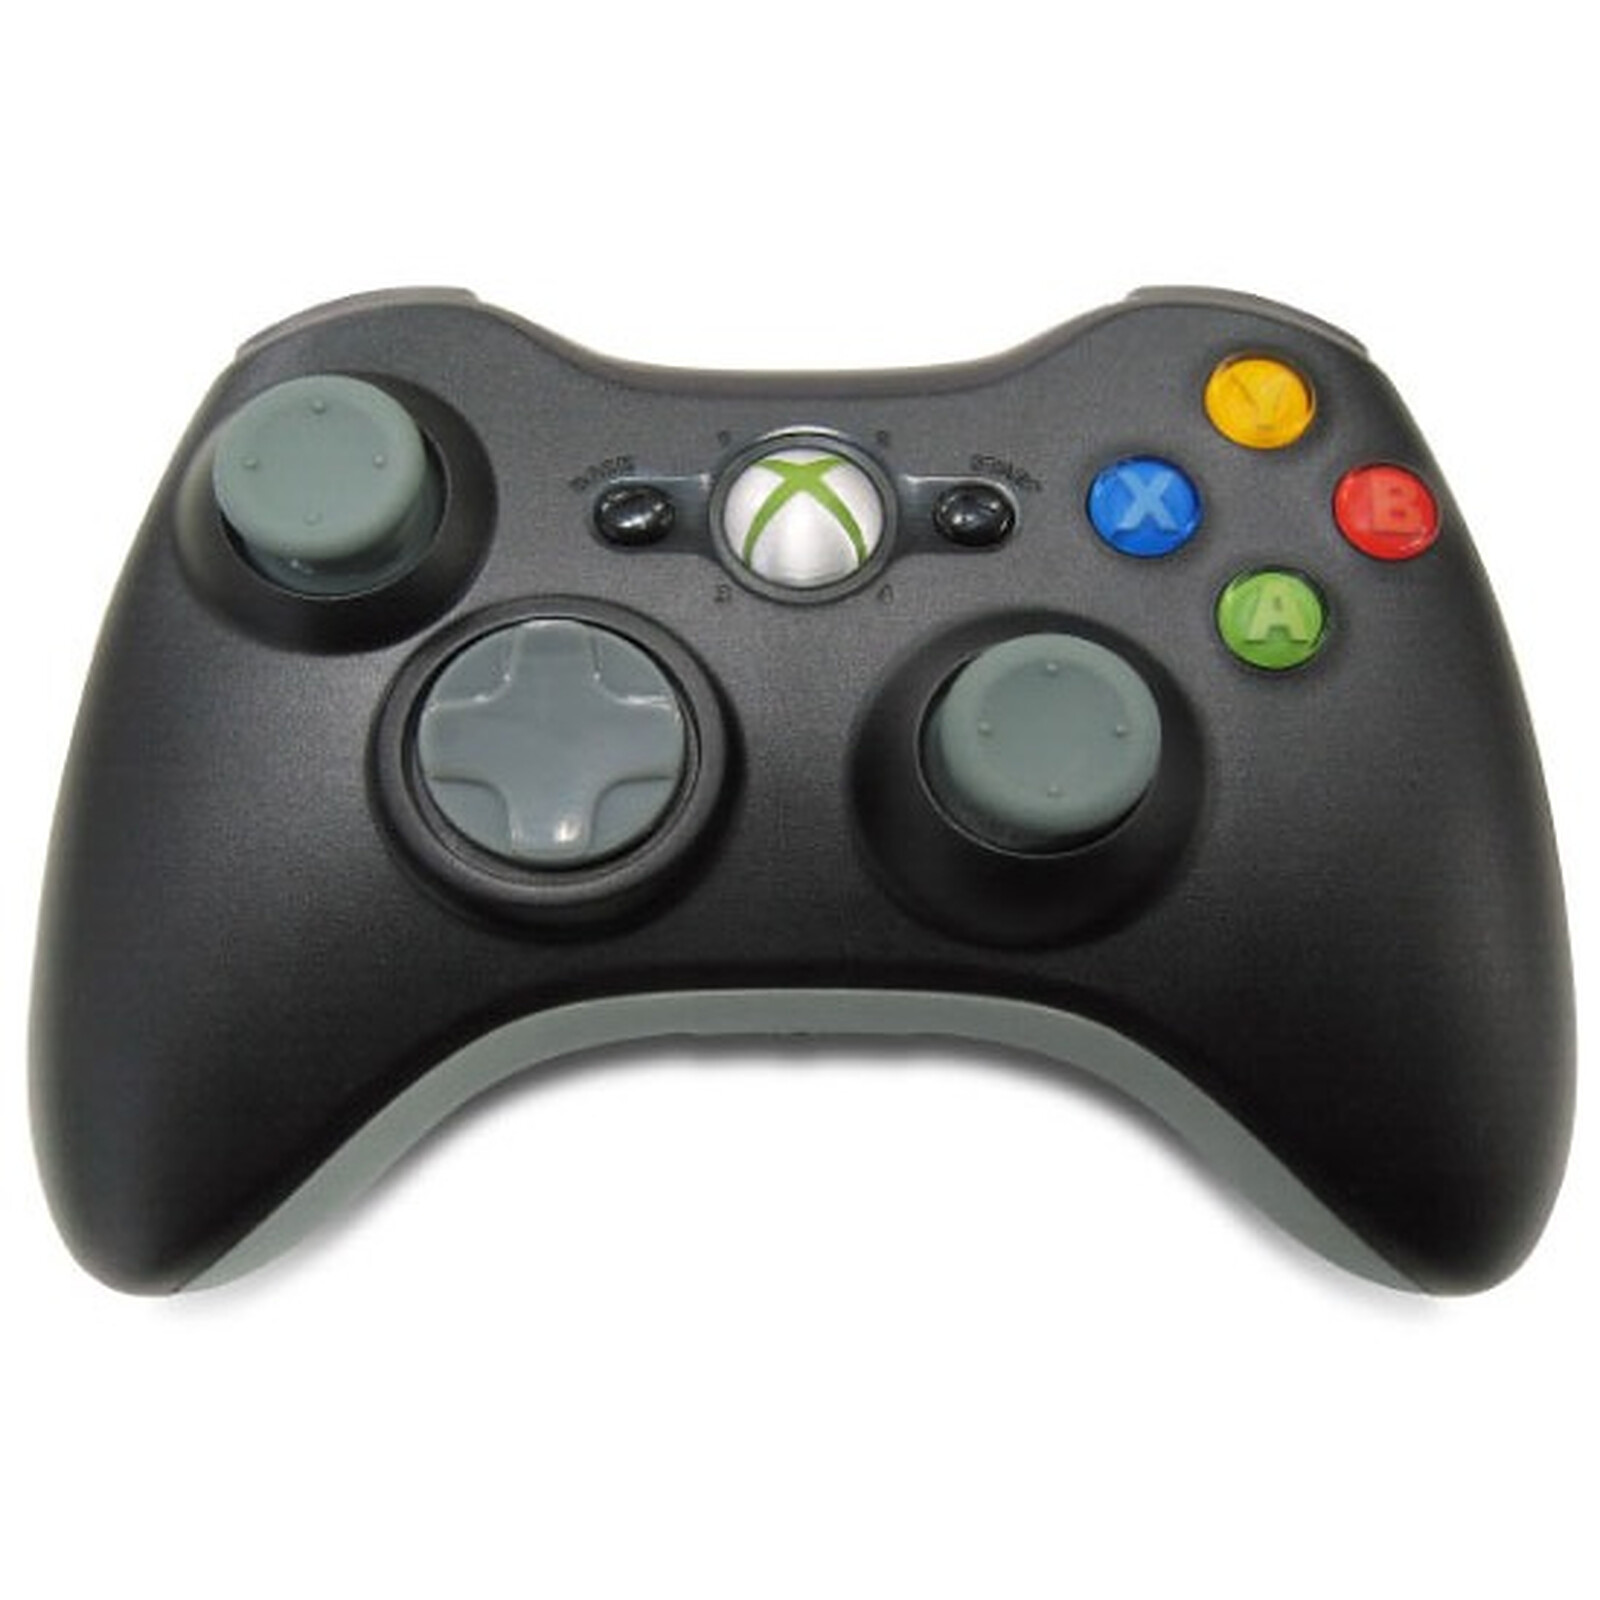 microsoft xbox 1 controller drivers 8.1 download